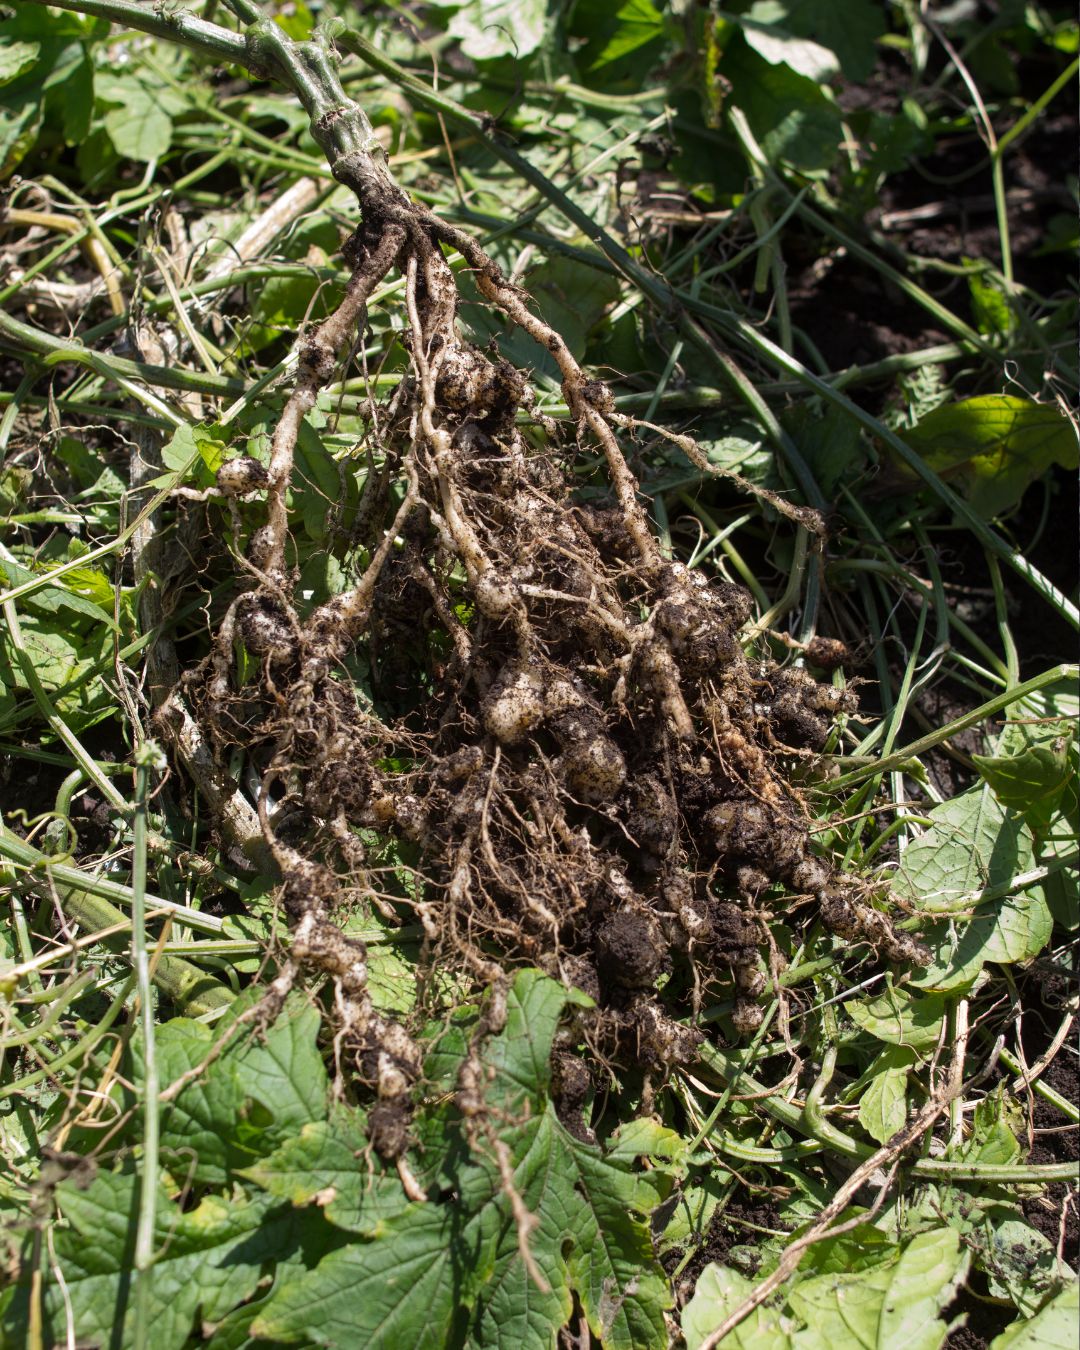 Roots with nodules due to nematode infection.